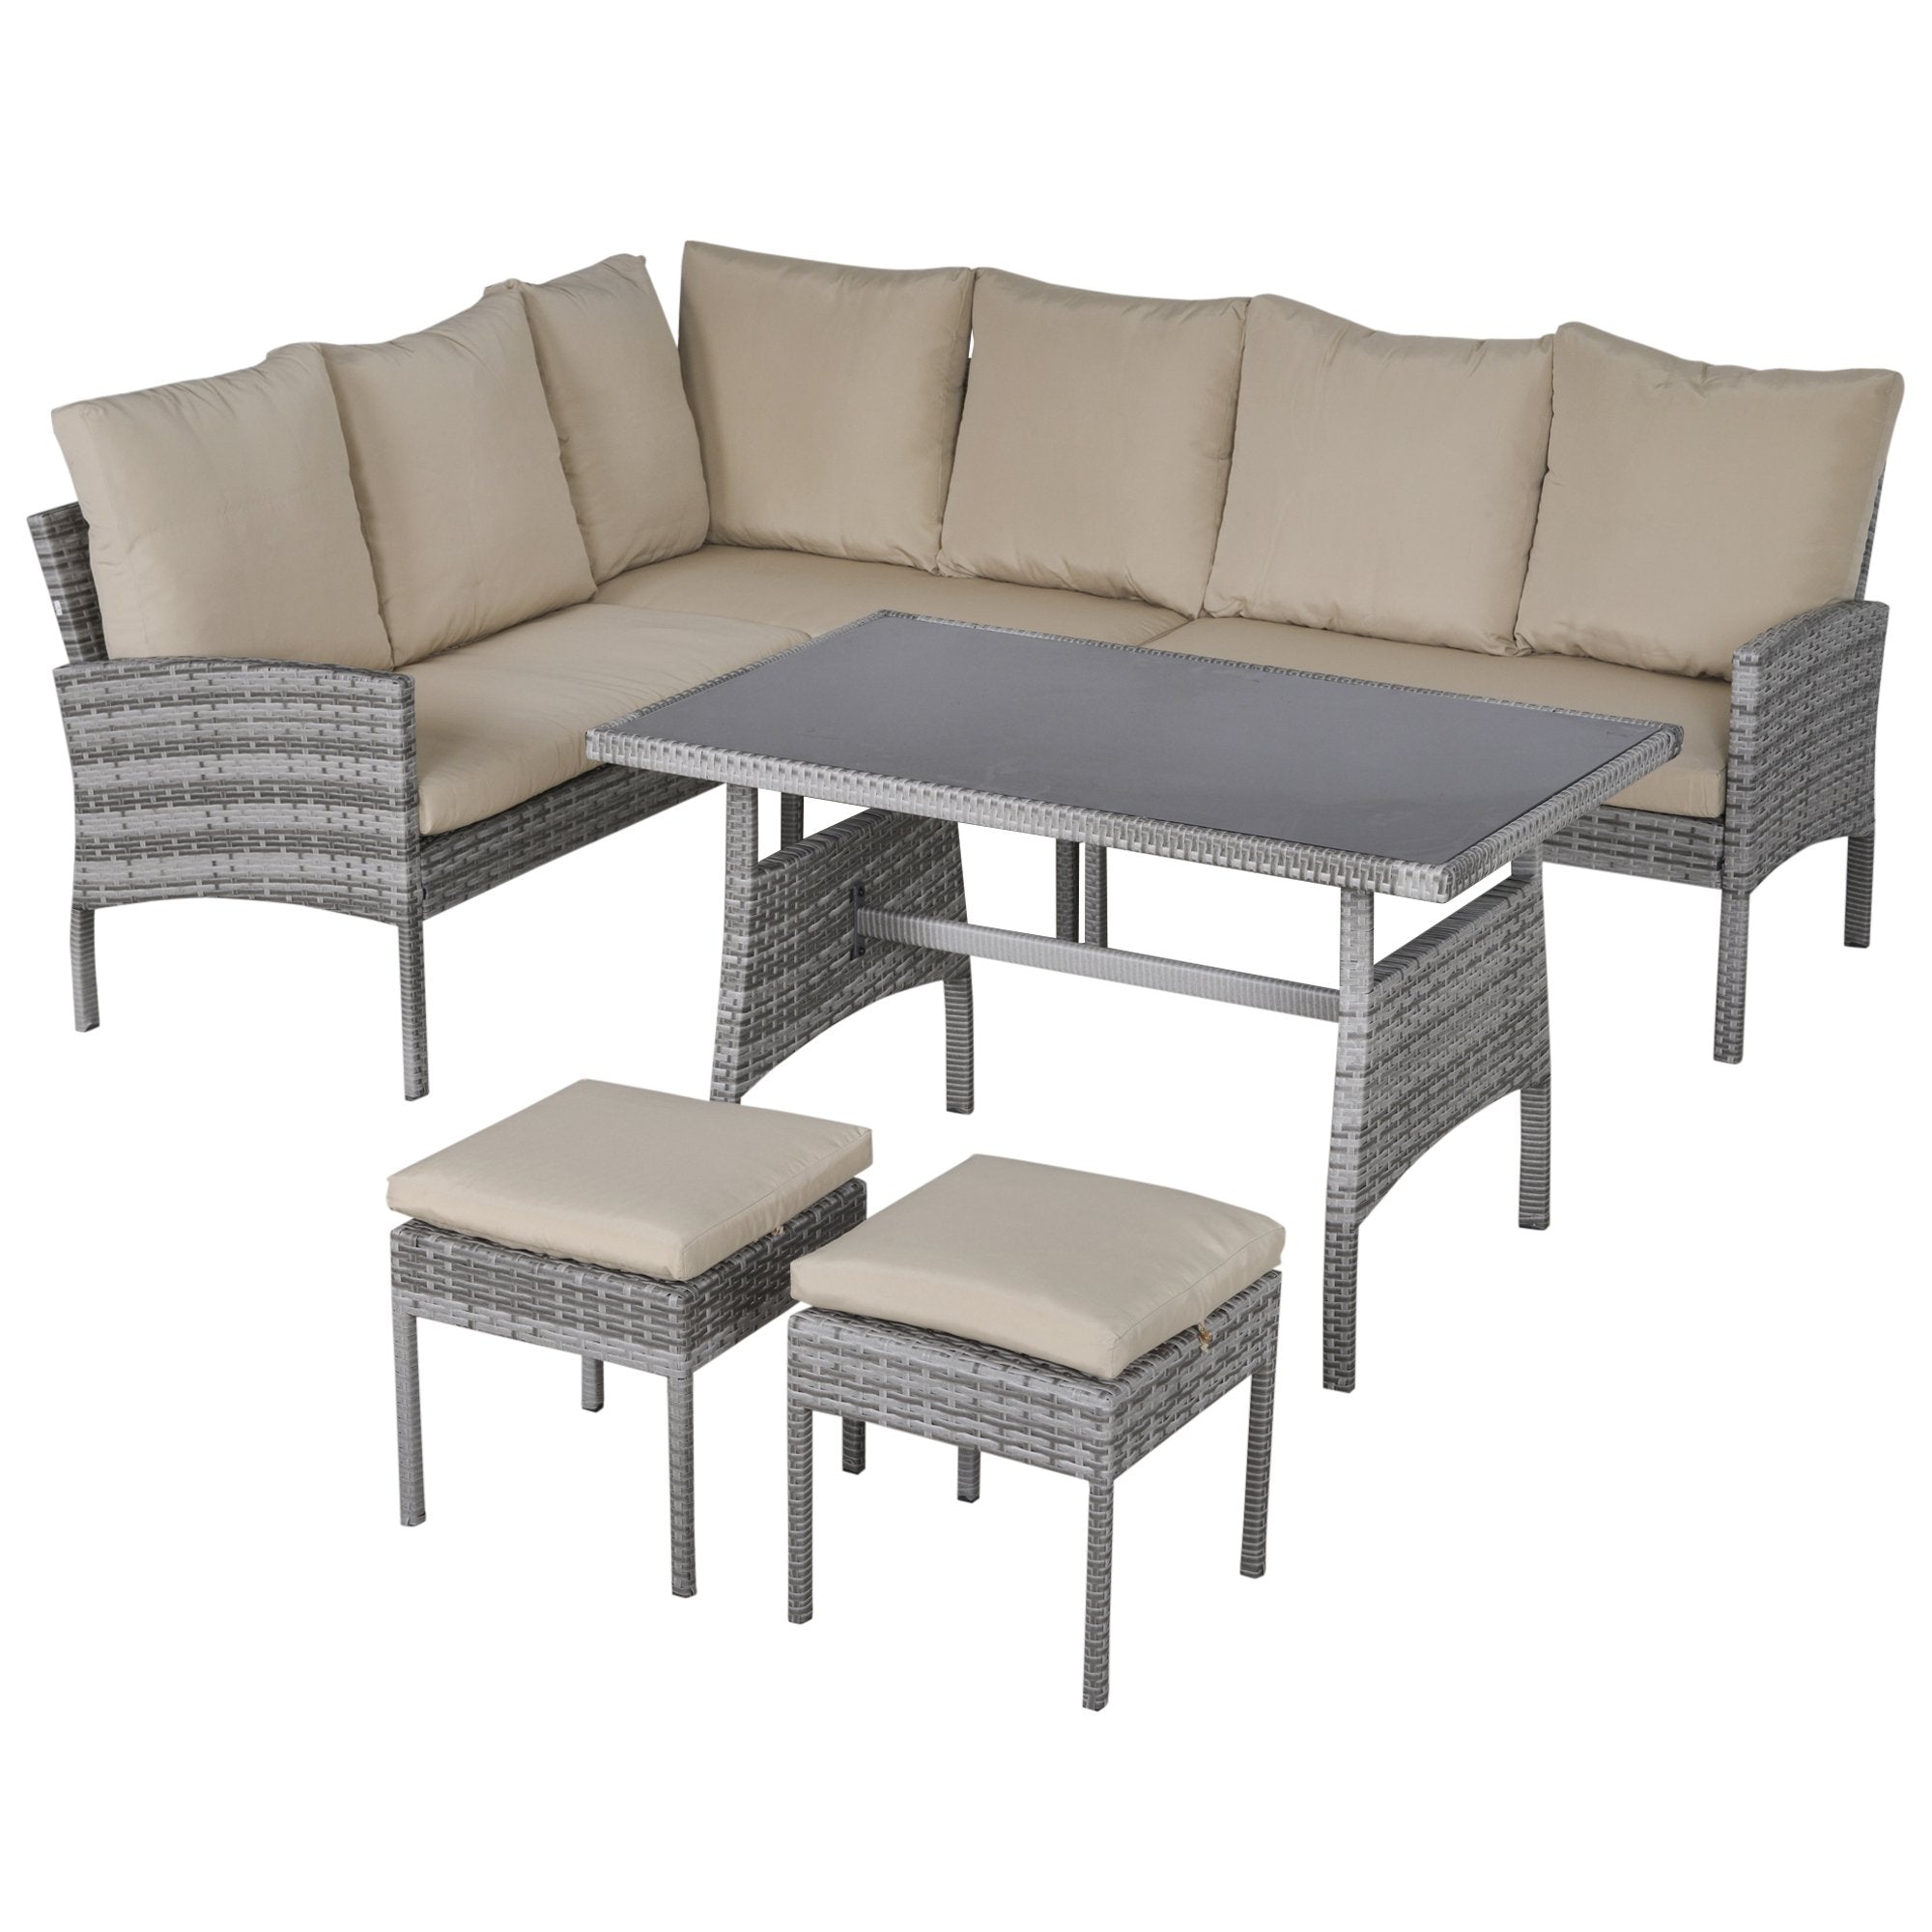 Outdoor Patio Dining Sets and Tables